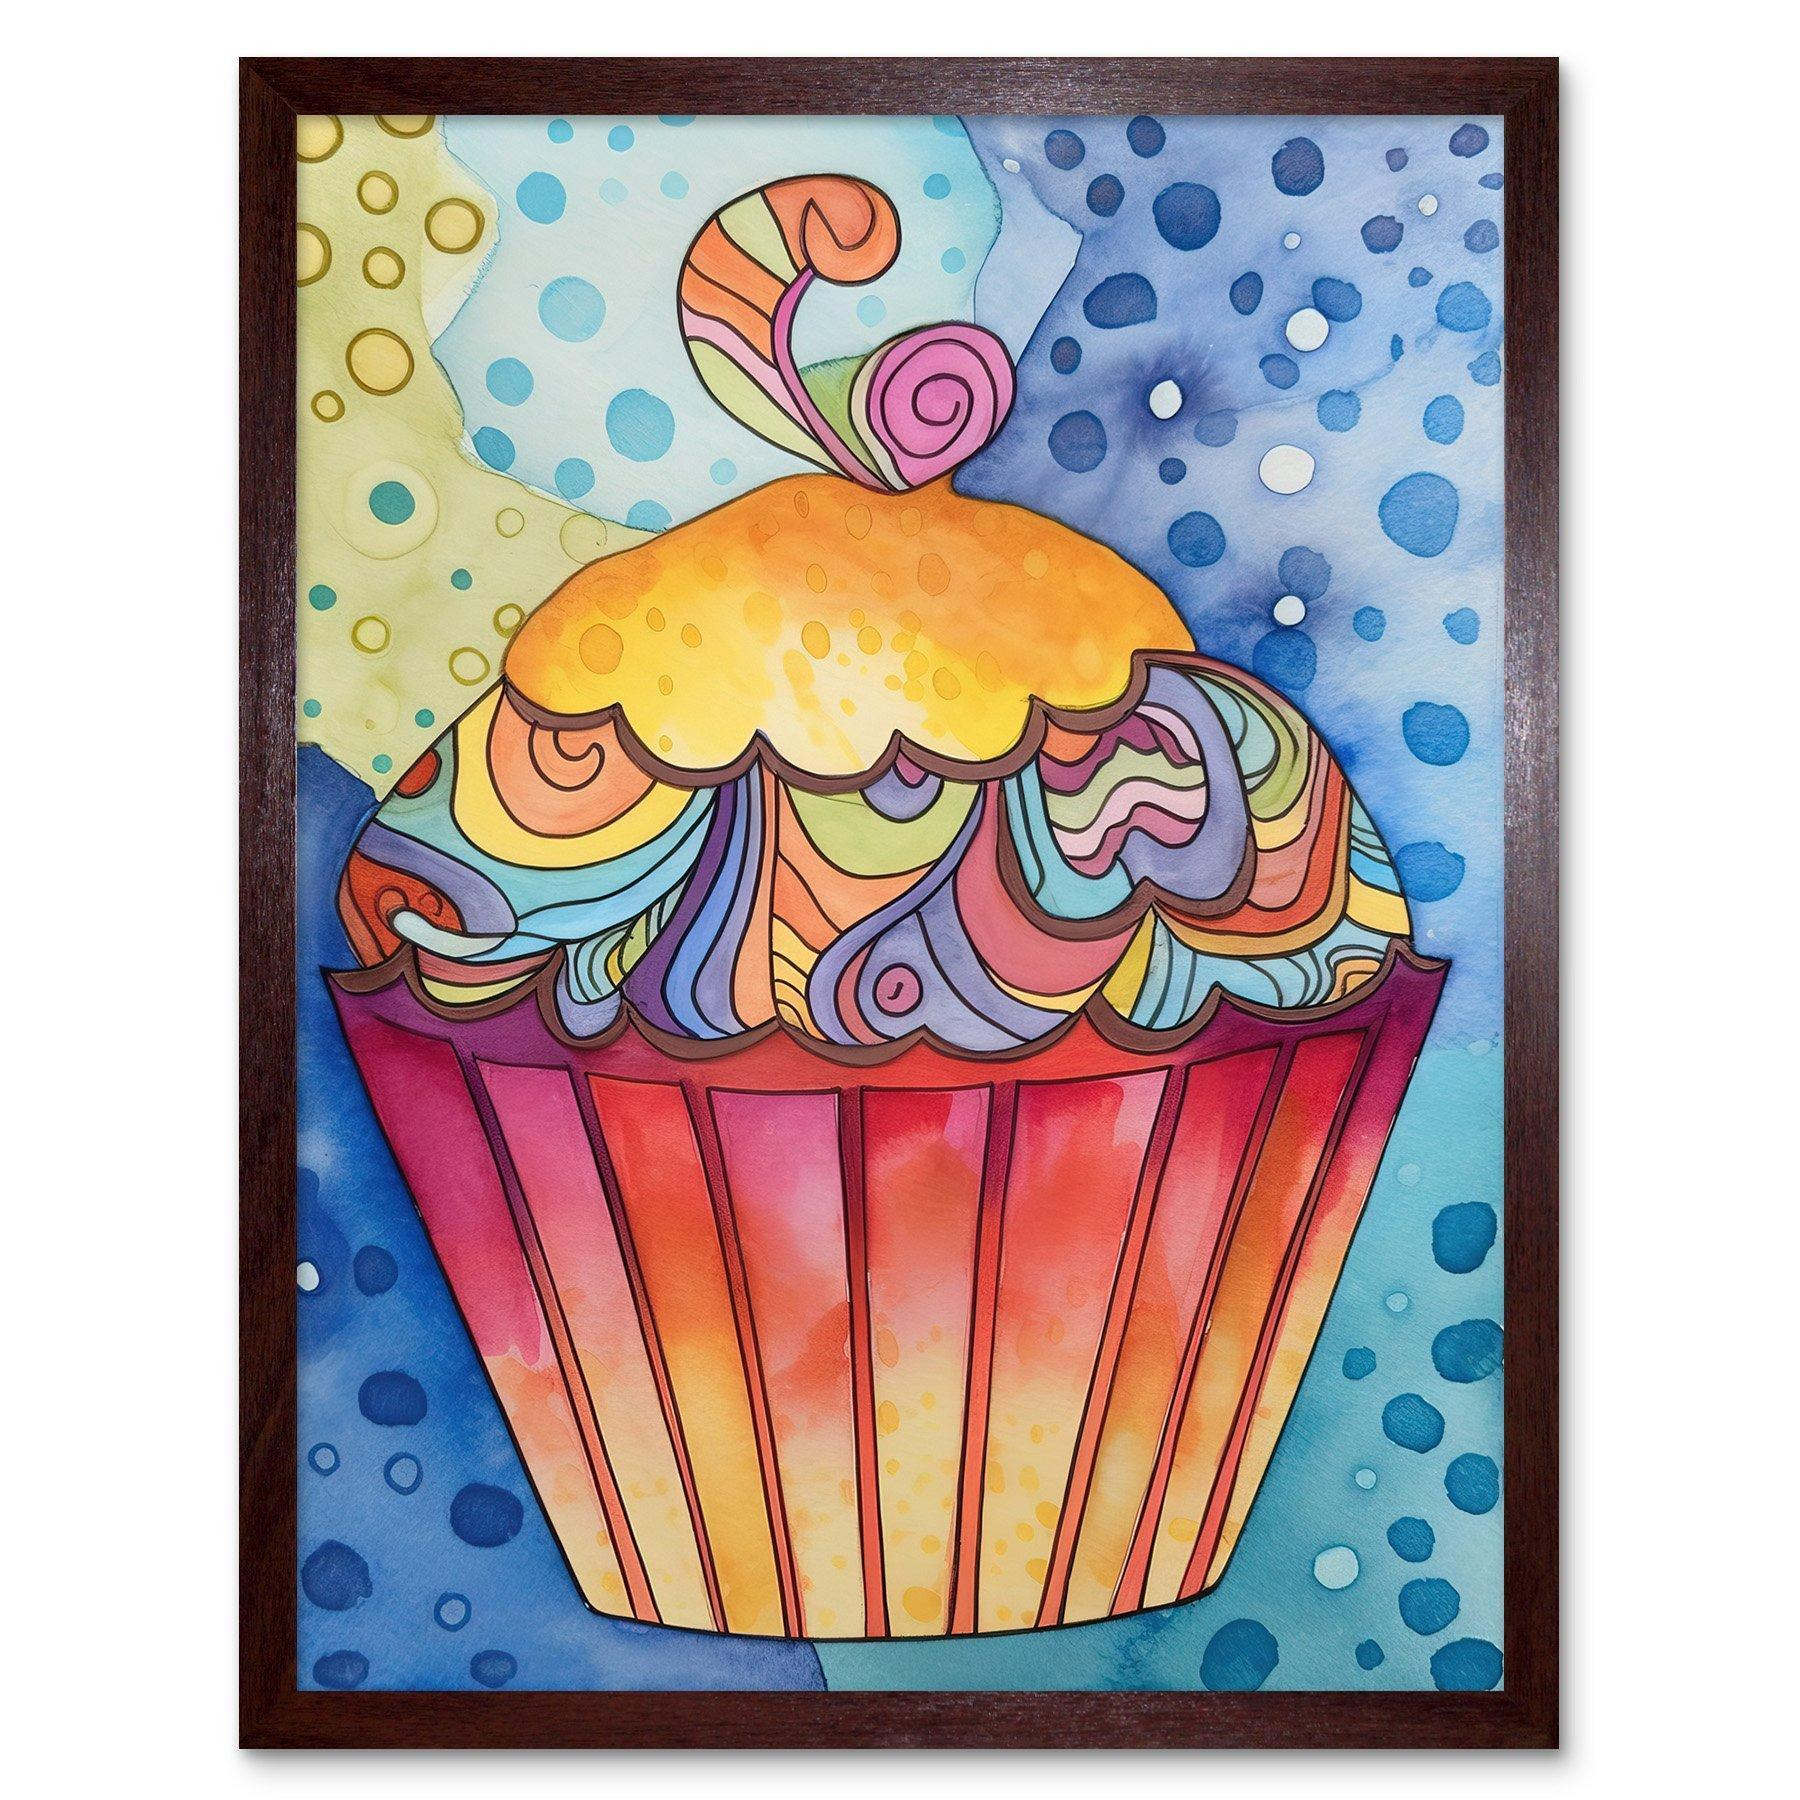 Cupcake With Colourful Frosting Folk Art Watercolour Painting Art Print Framed Poster Wall Decor 12x16 inch - image 1